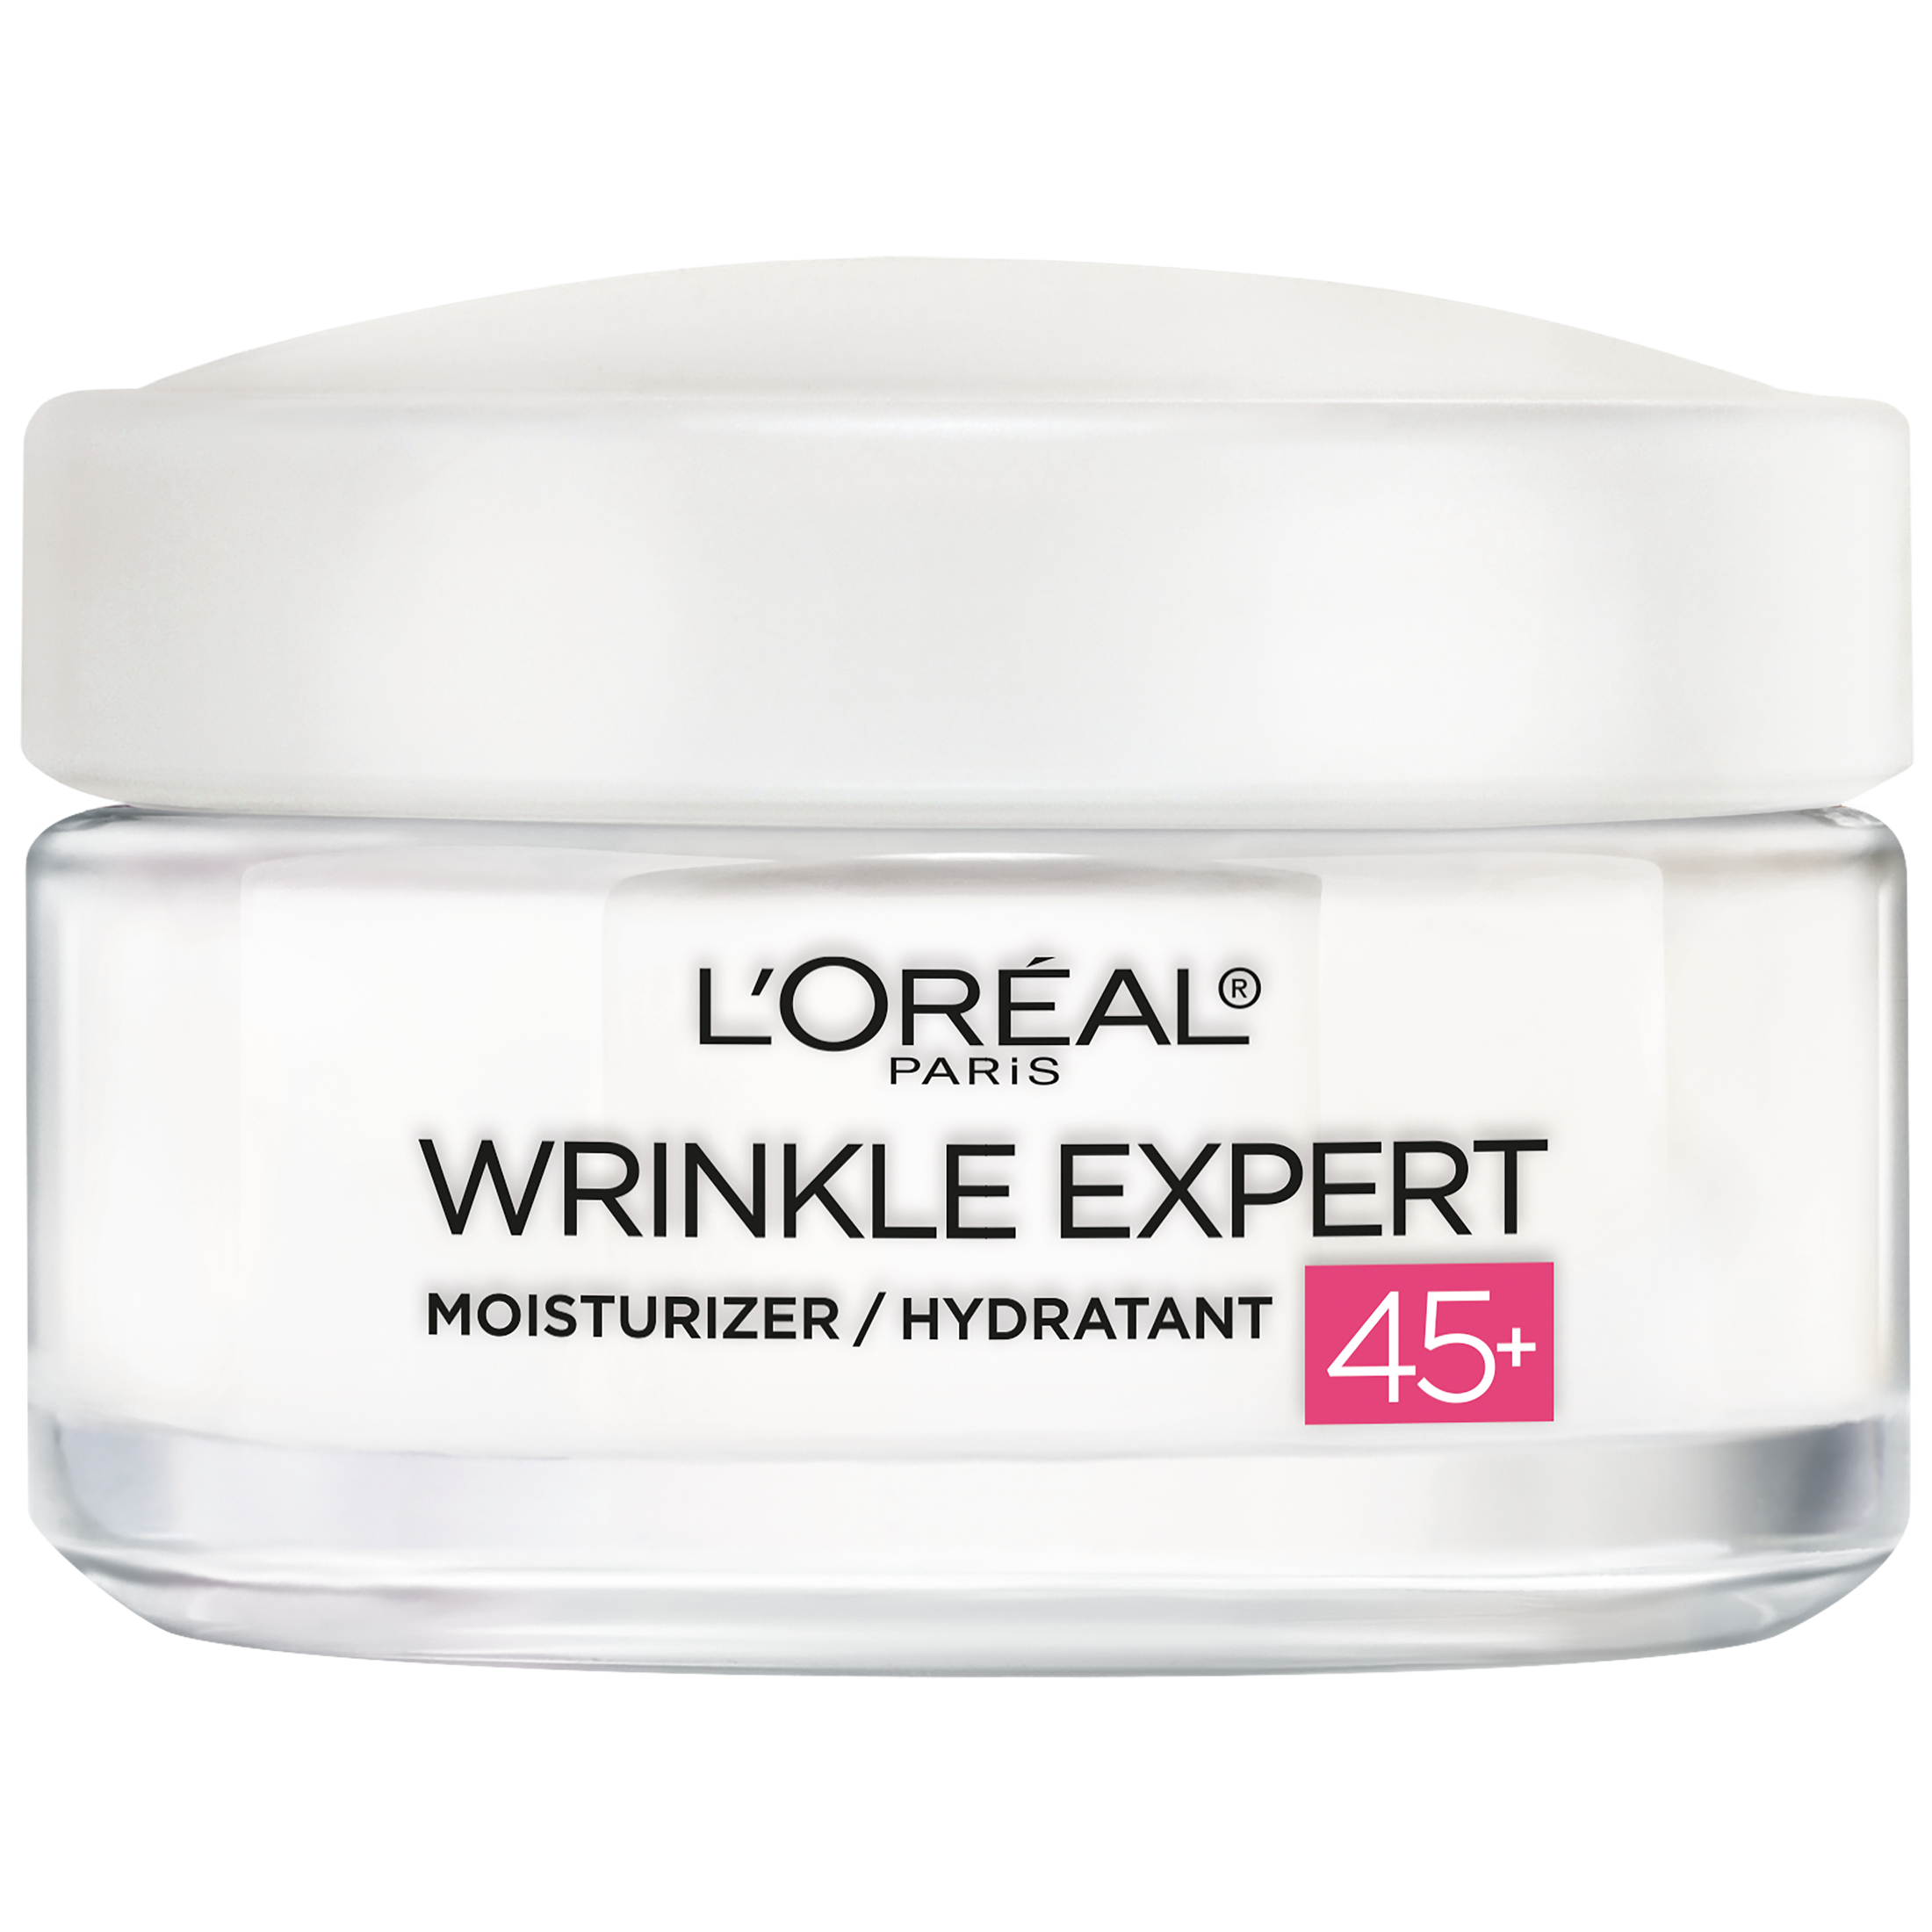 L'Oreal Paris Wrinkle Expert 45+ Day and Night Moisturizer, 1.7 oz - image 1 of 5